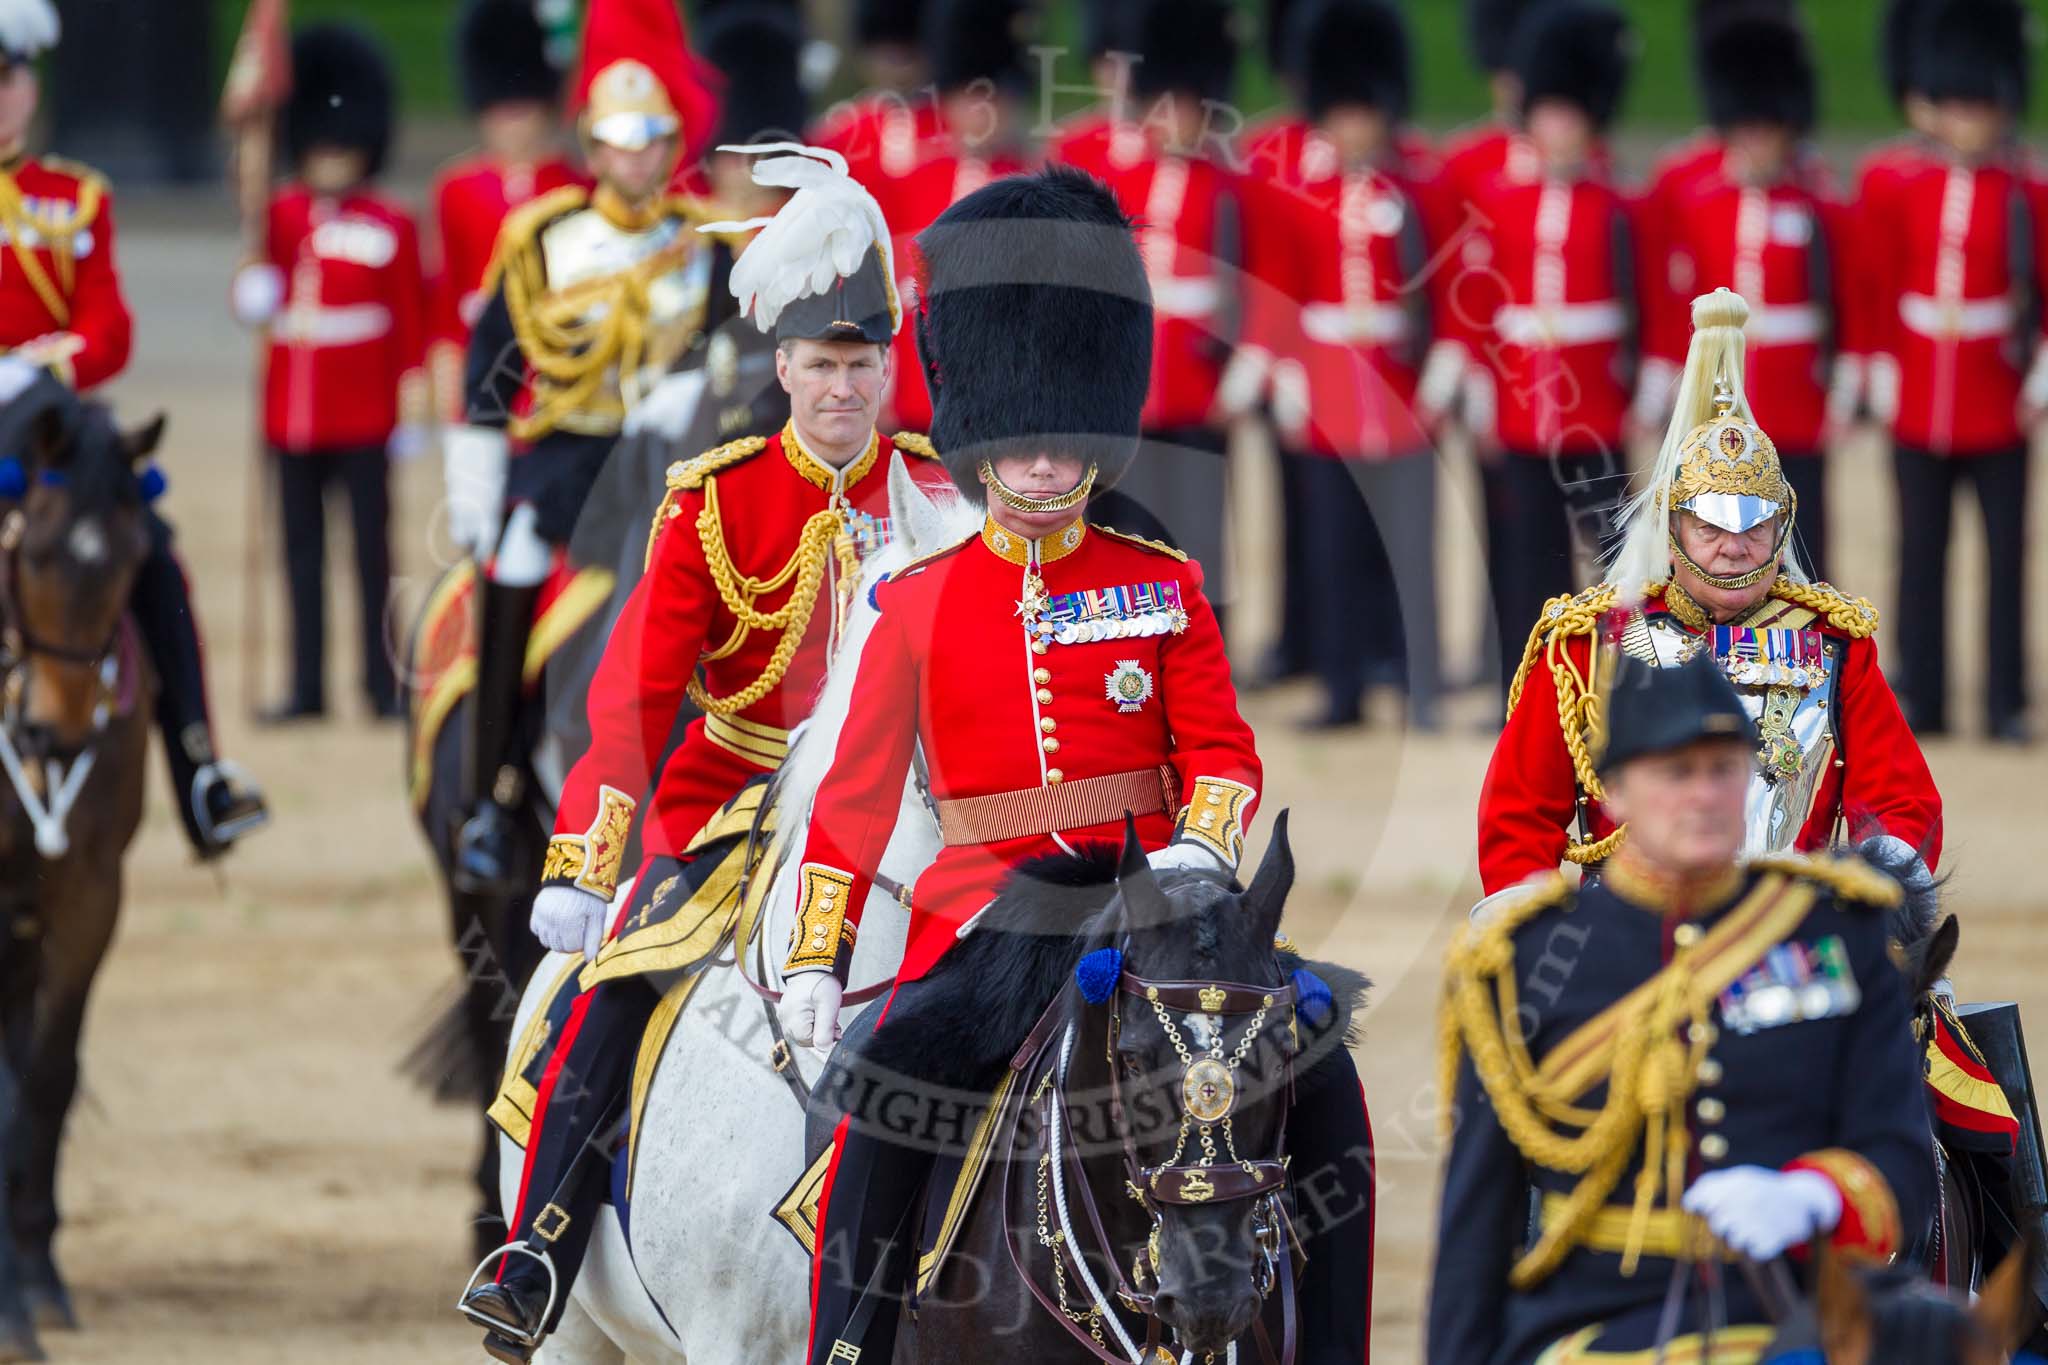 The Colonel's Review 2015.
Horse Guards Parade, Westminster,
London,

United Kingdom,
on 06 June 2015 at 11:05, image #234